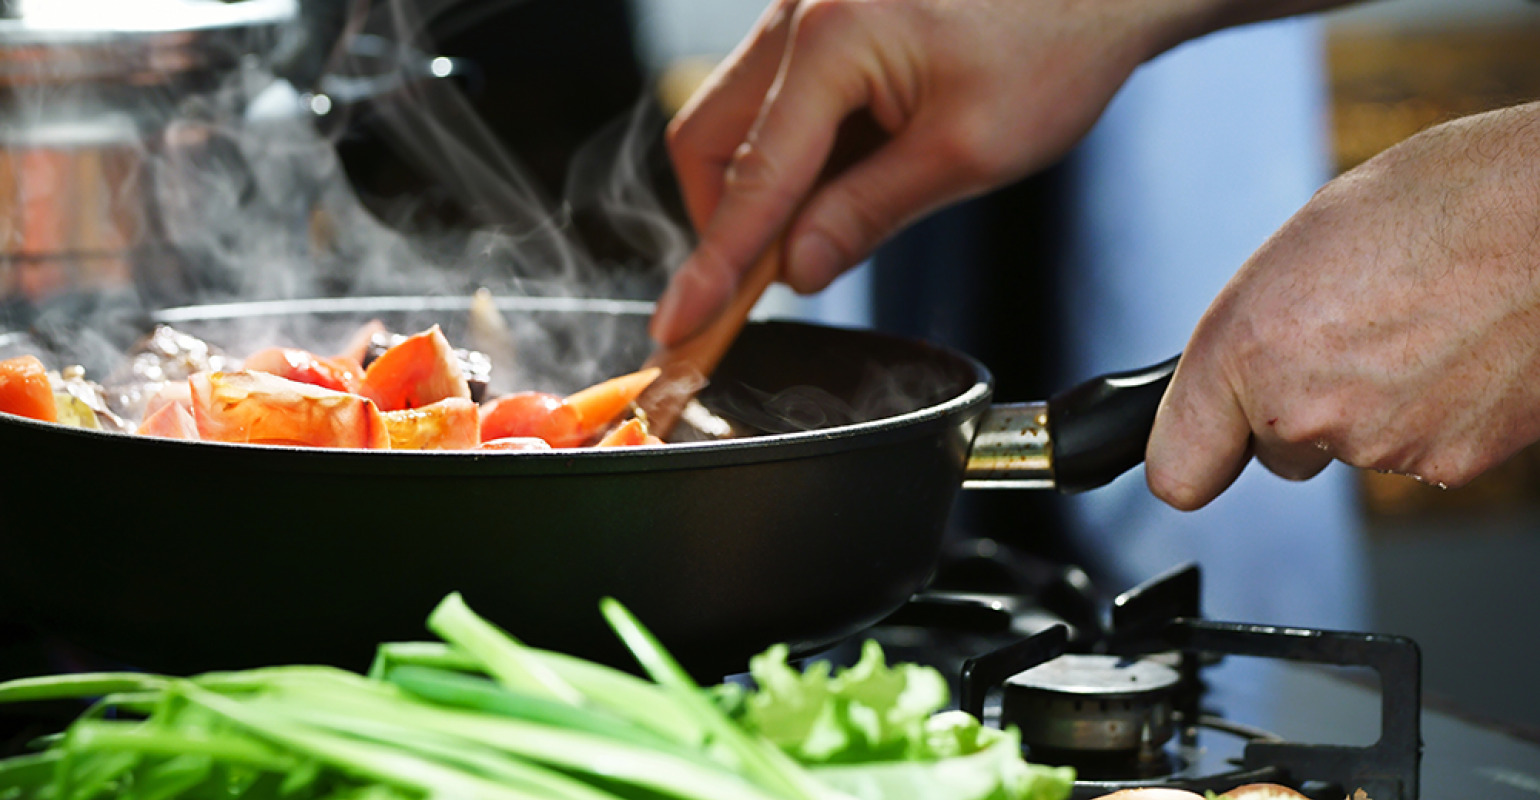 Does Smell of Cooking Food Pollute the Air We Breathe?